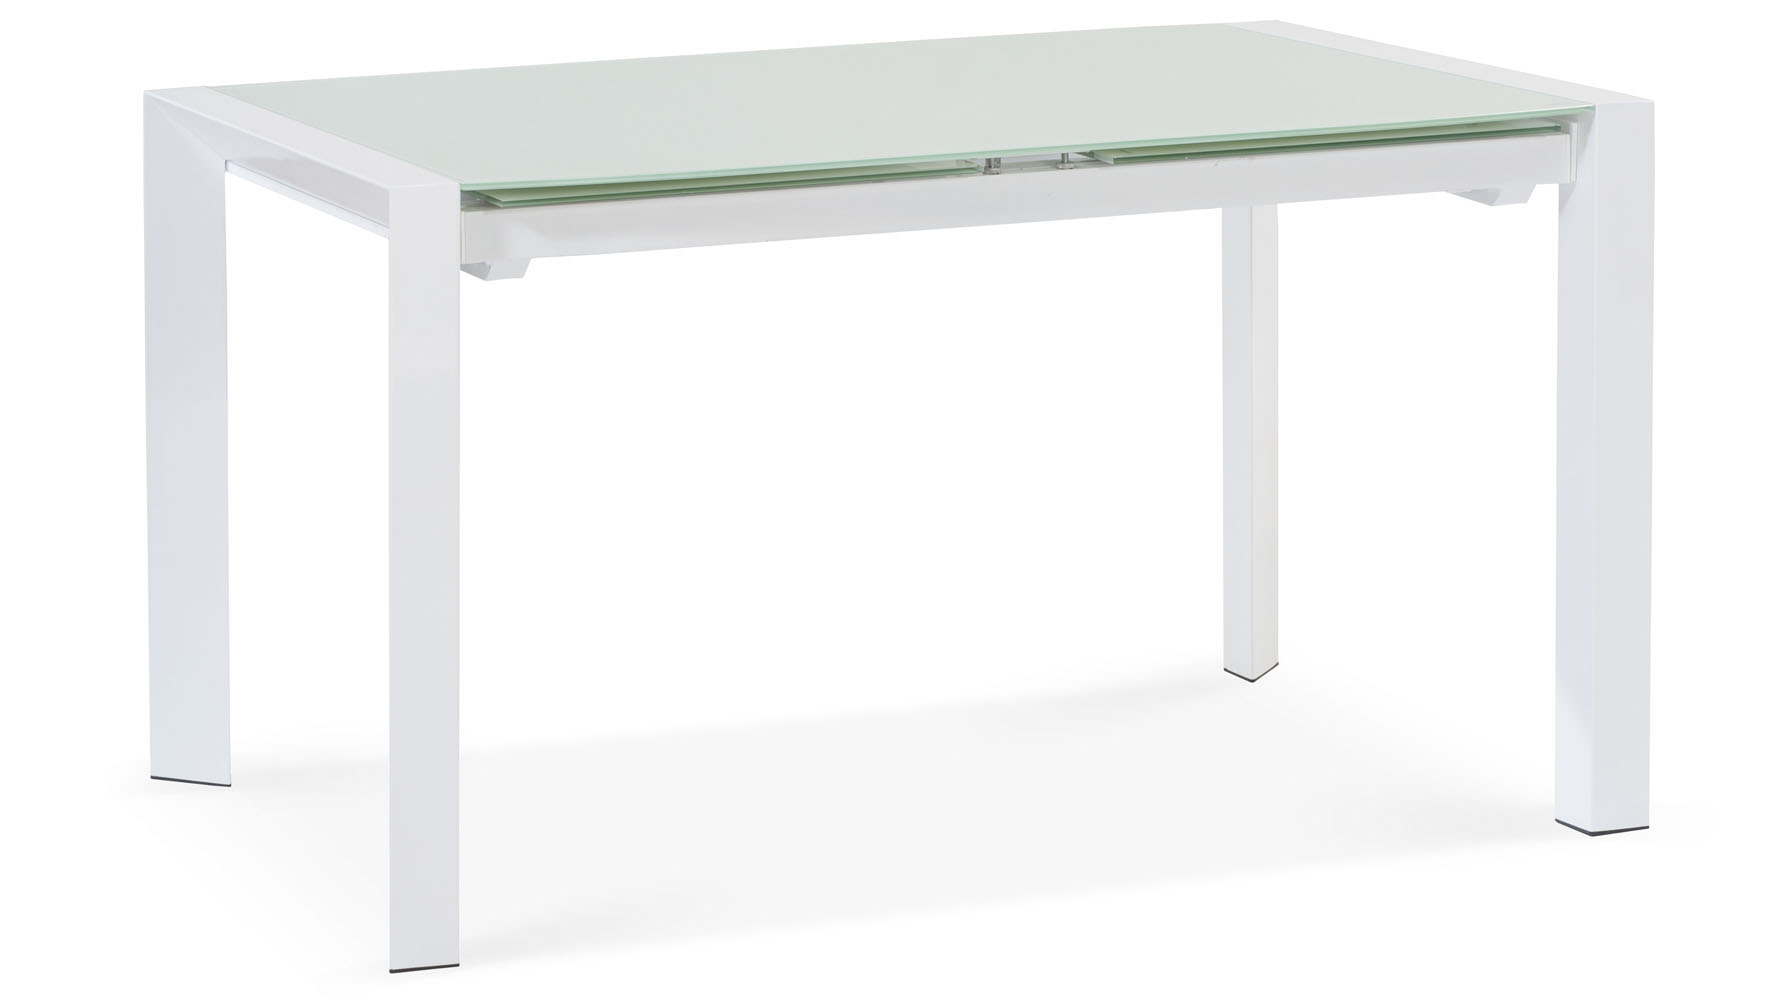 alton extension dining table extending modern with white glass top accent night zuri furniture covers shoe organizer target wood and iron side deep console west elm coffee desk